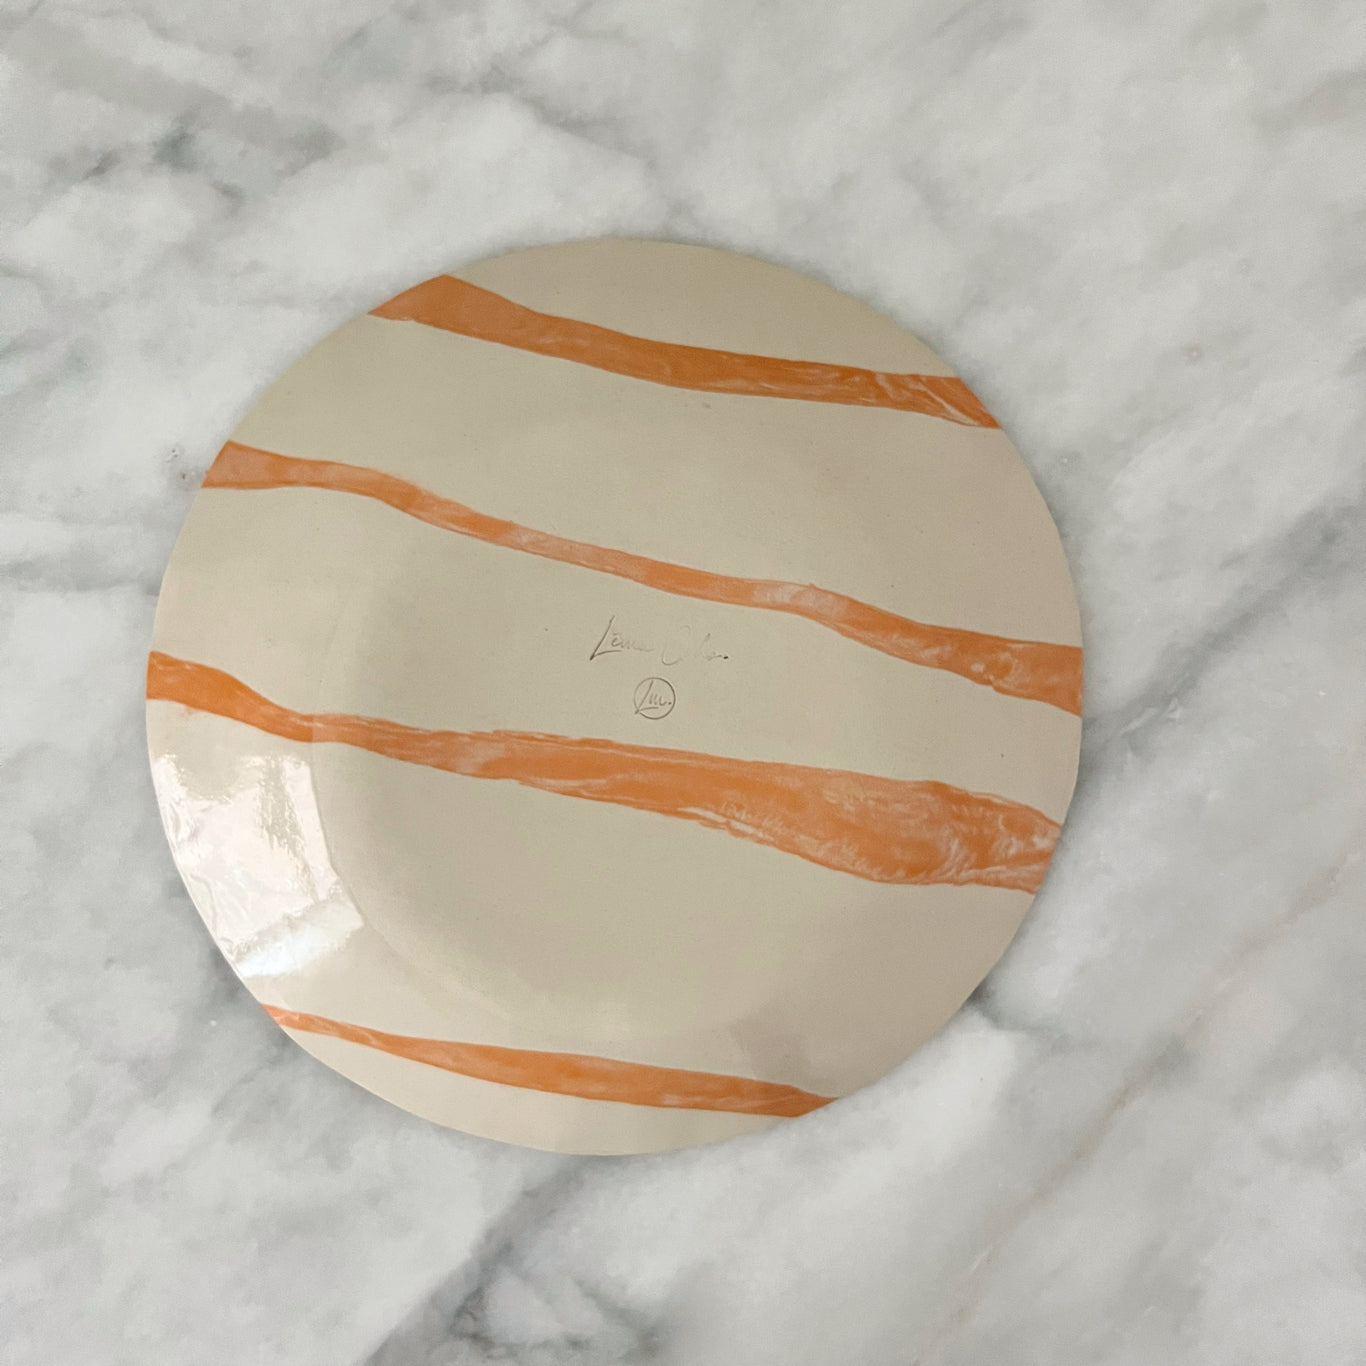 one of a kind ceramic orange and off white plates made in Corsica